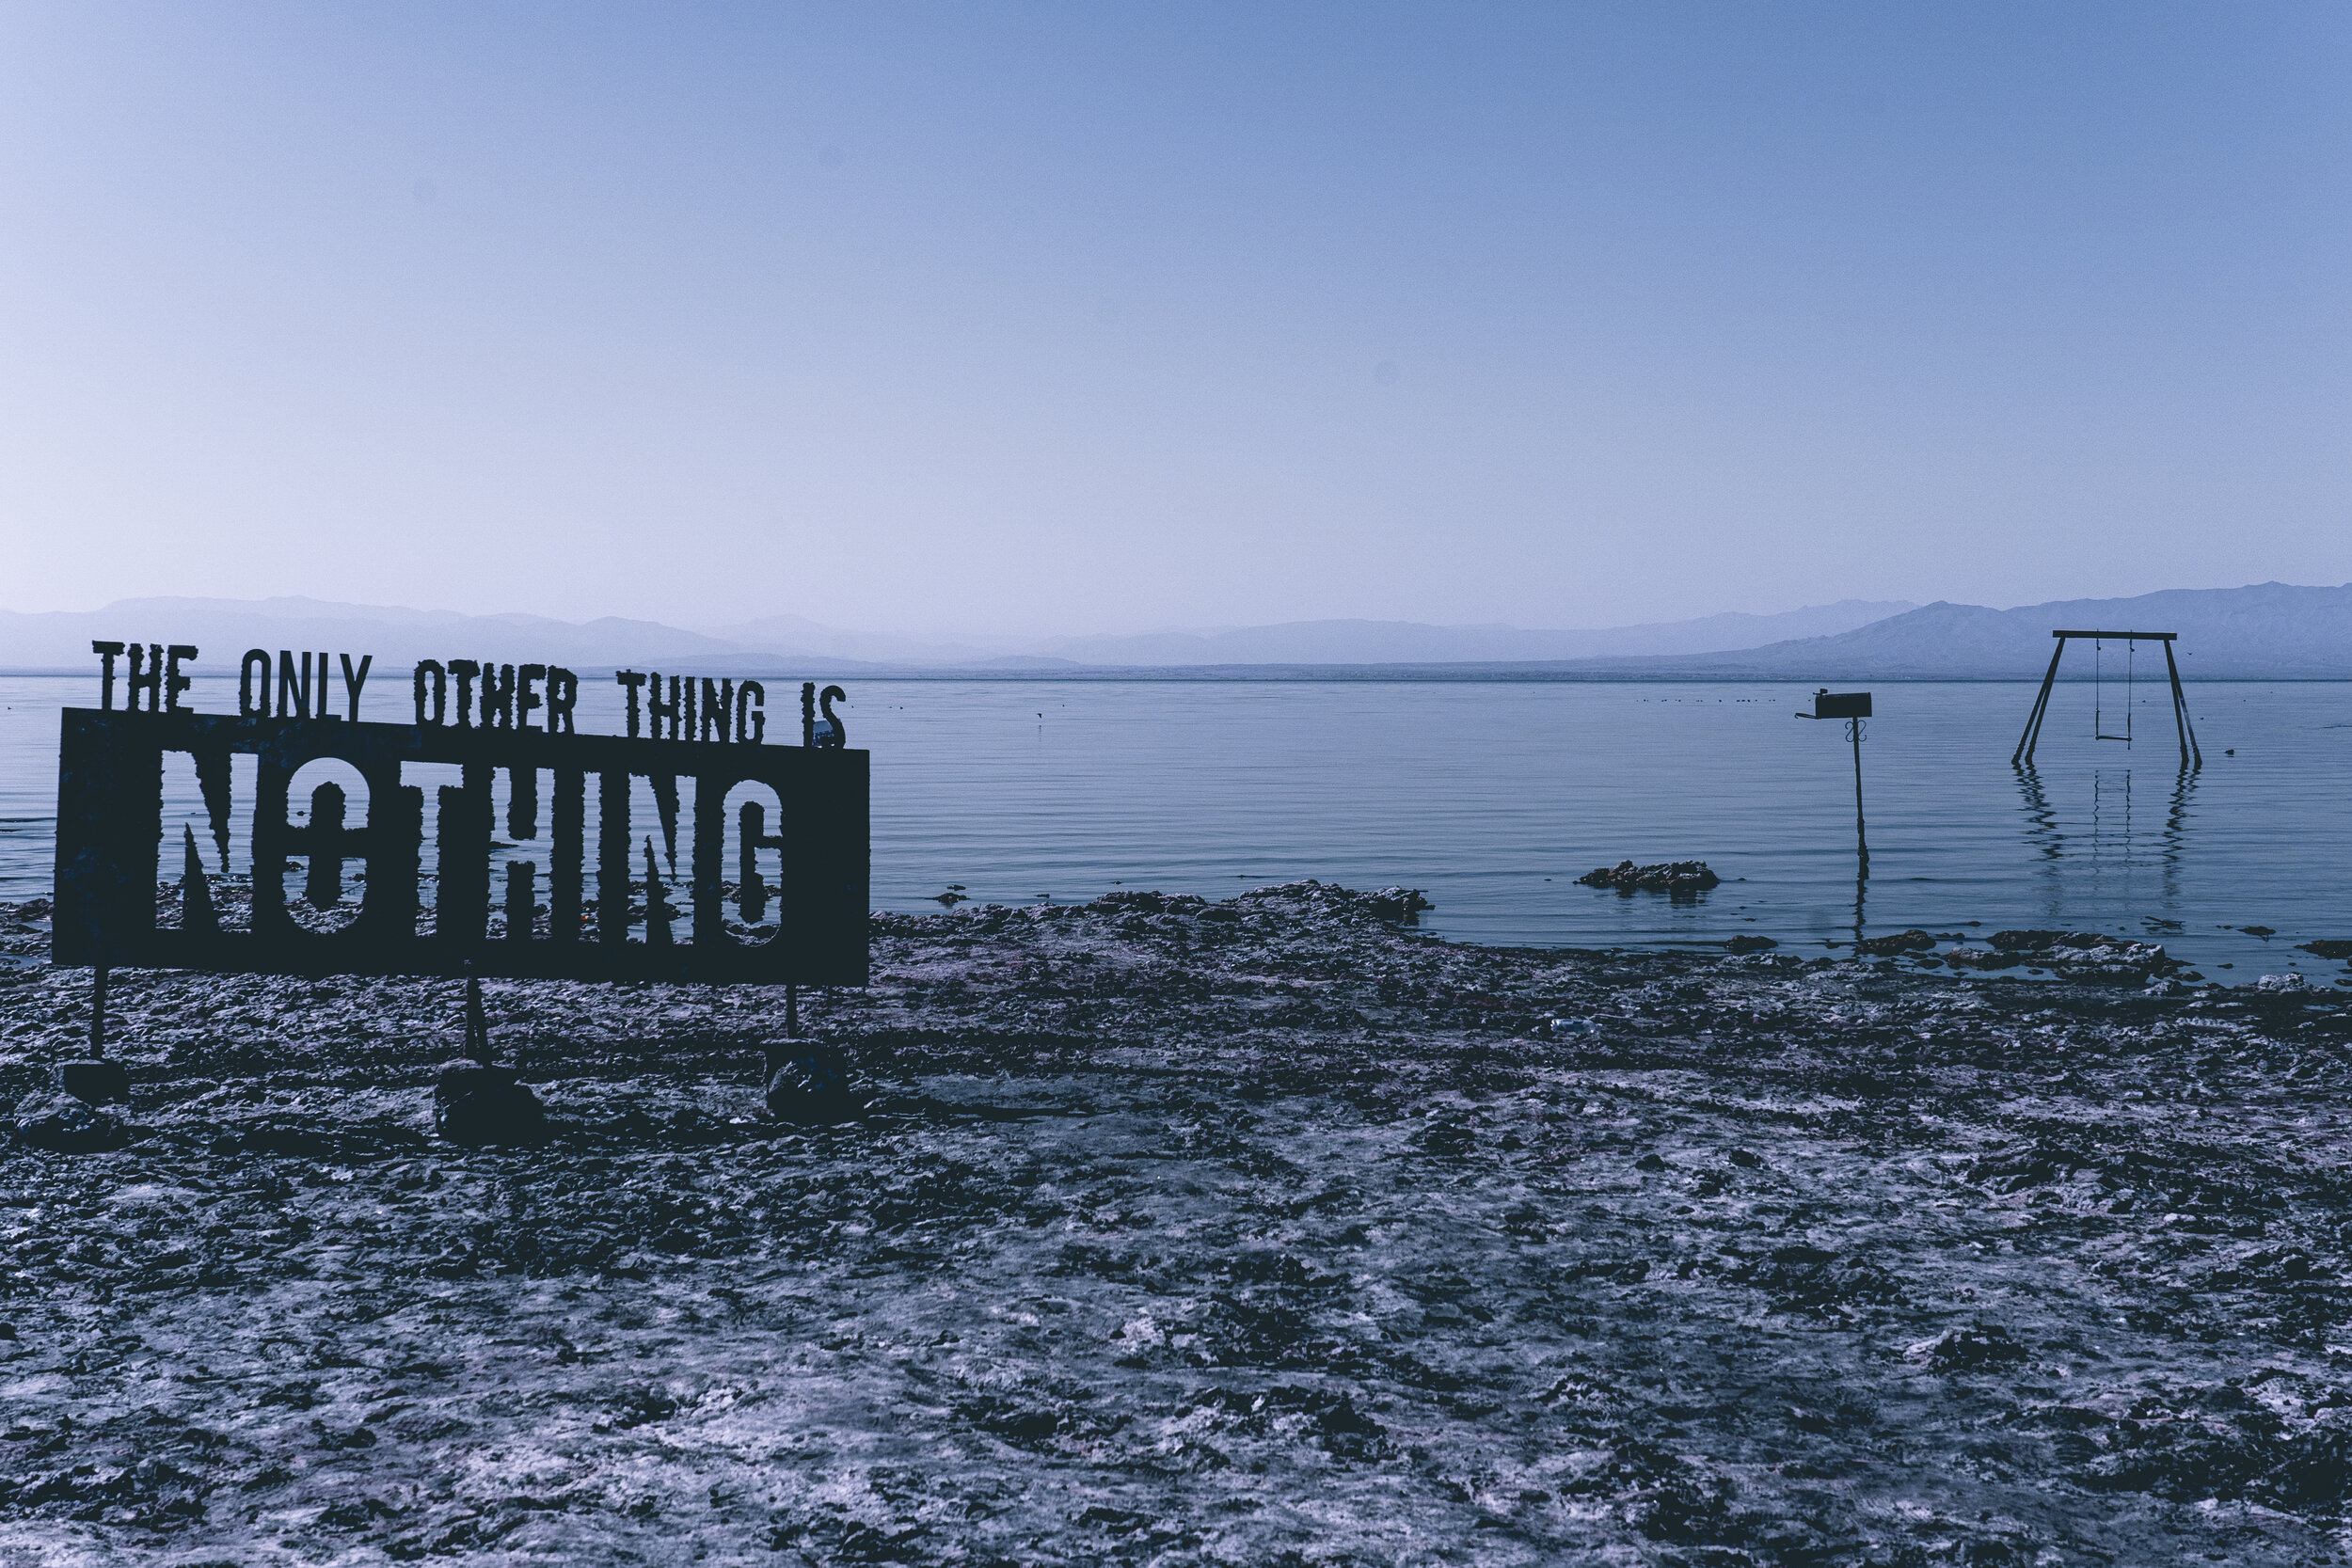   Now for the obscure:  This is  Salton Sea , and it's actually a lake. Last year,  Palm Springs Life  referred to it as "  the biggest environmental disaster in California history  ." Here's our best condensed version: In 1905, farmers altered the f